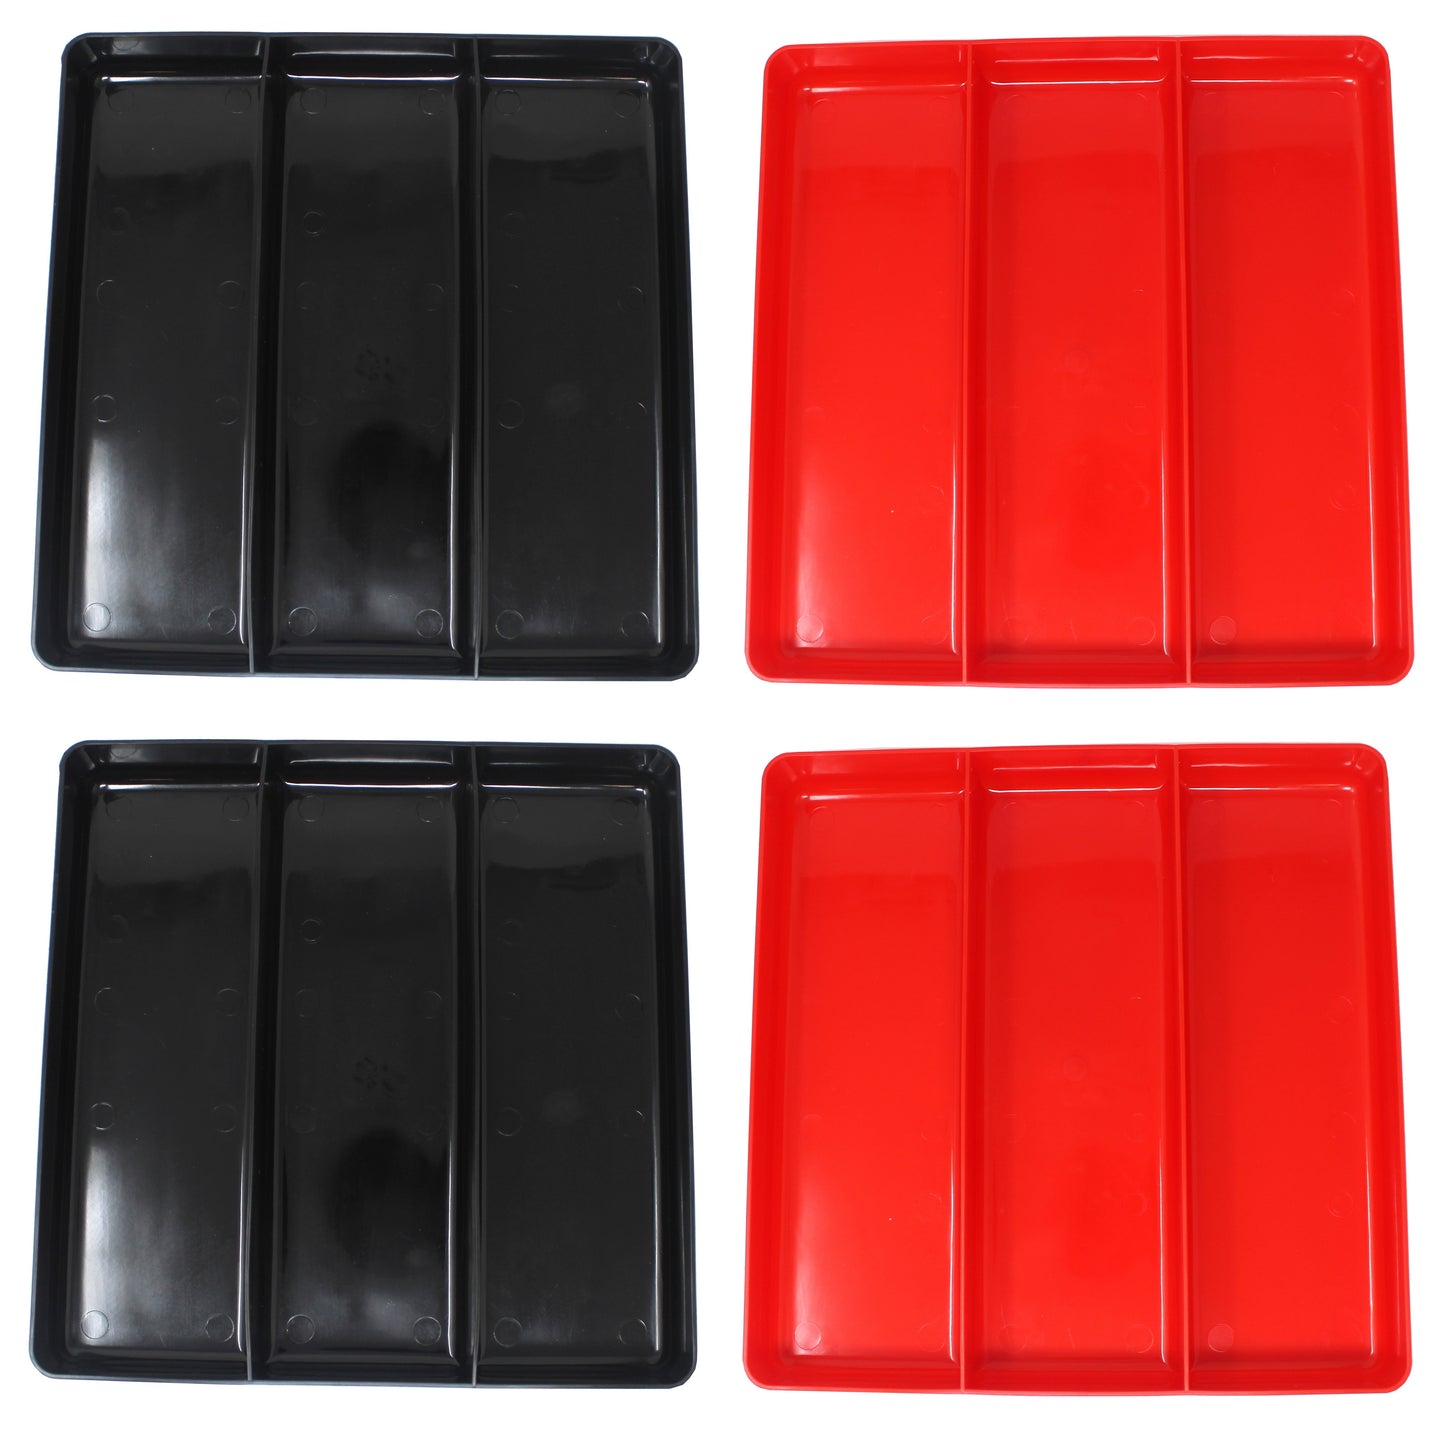 Black & Red Stackable Lightweight 3 Compartment Organizer Tray Kit- Heavy-Duty